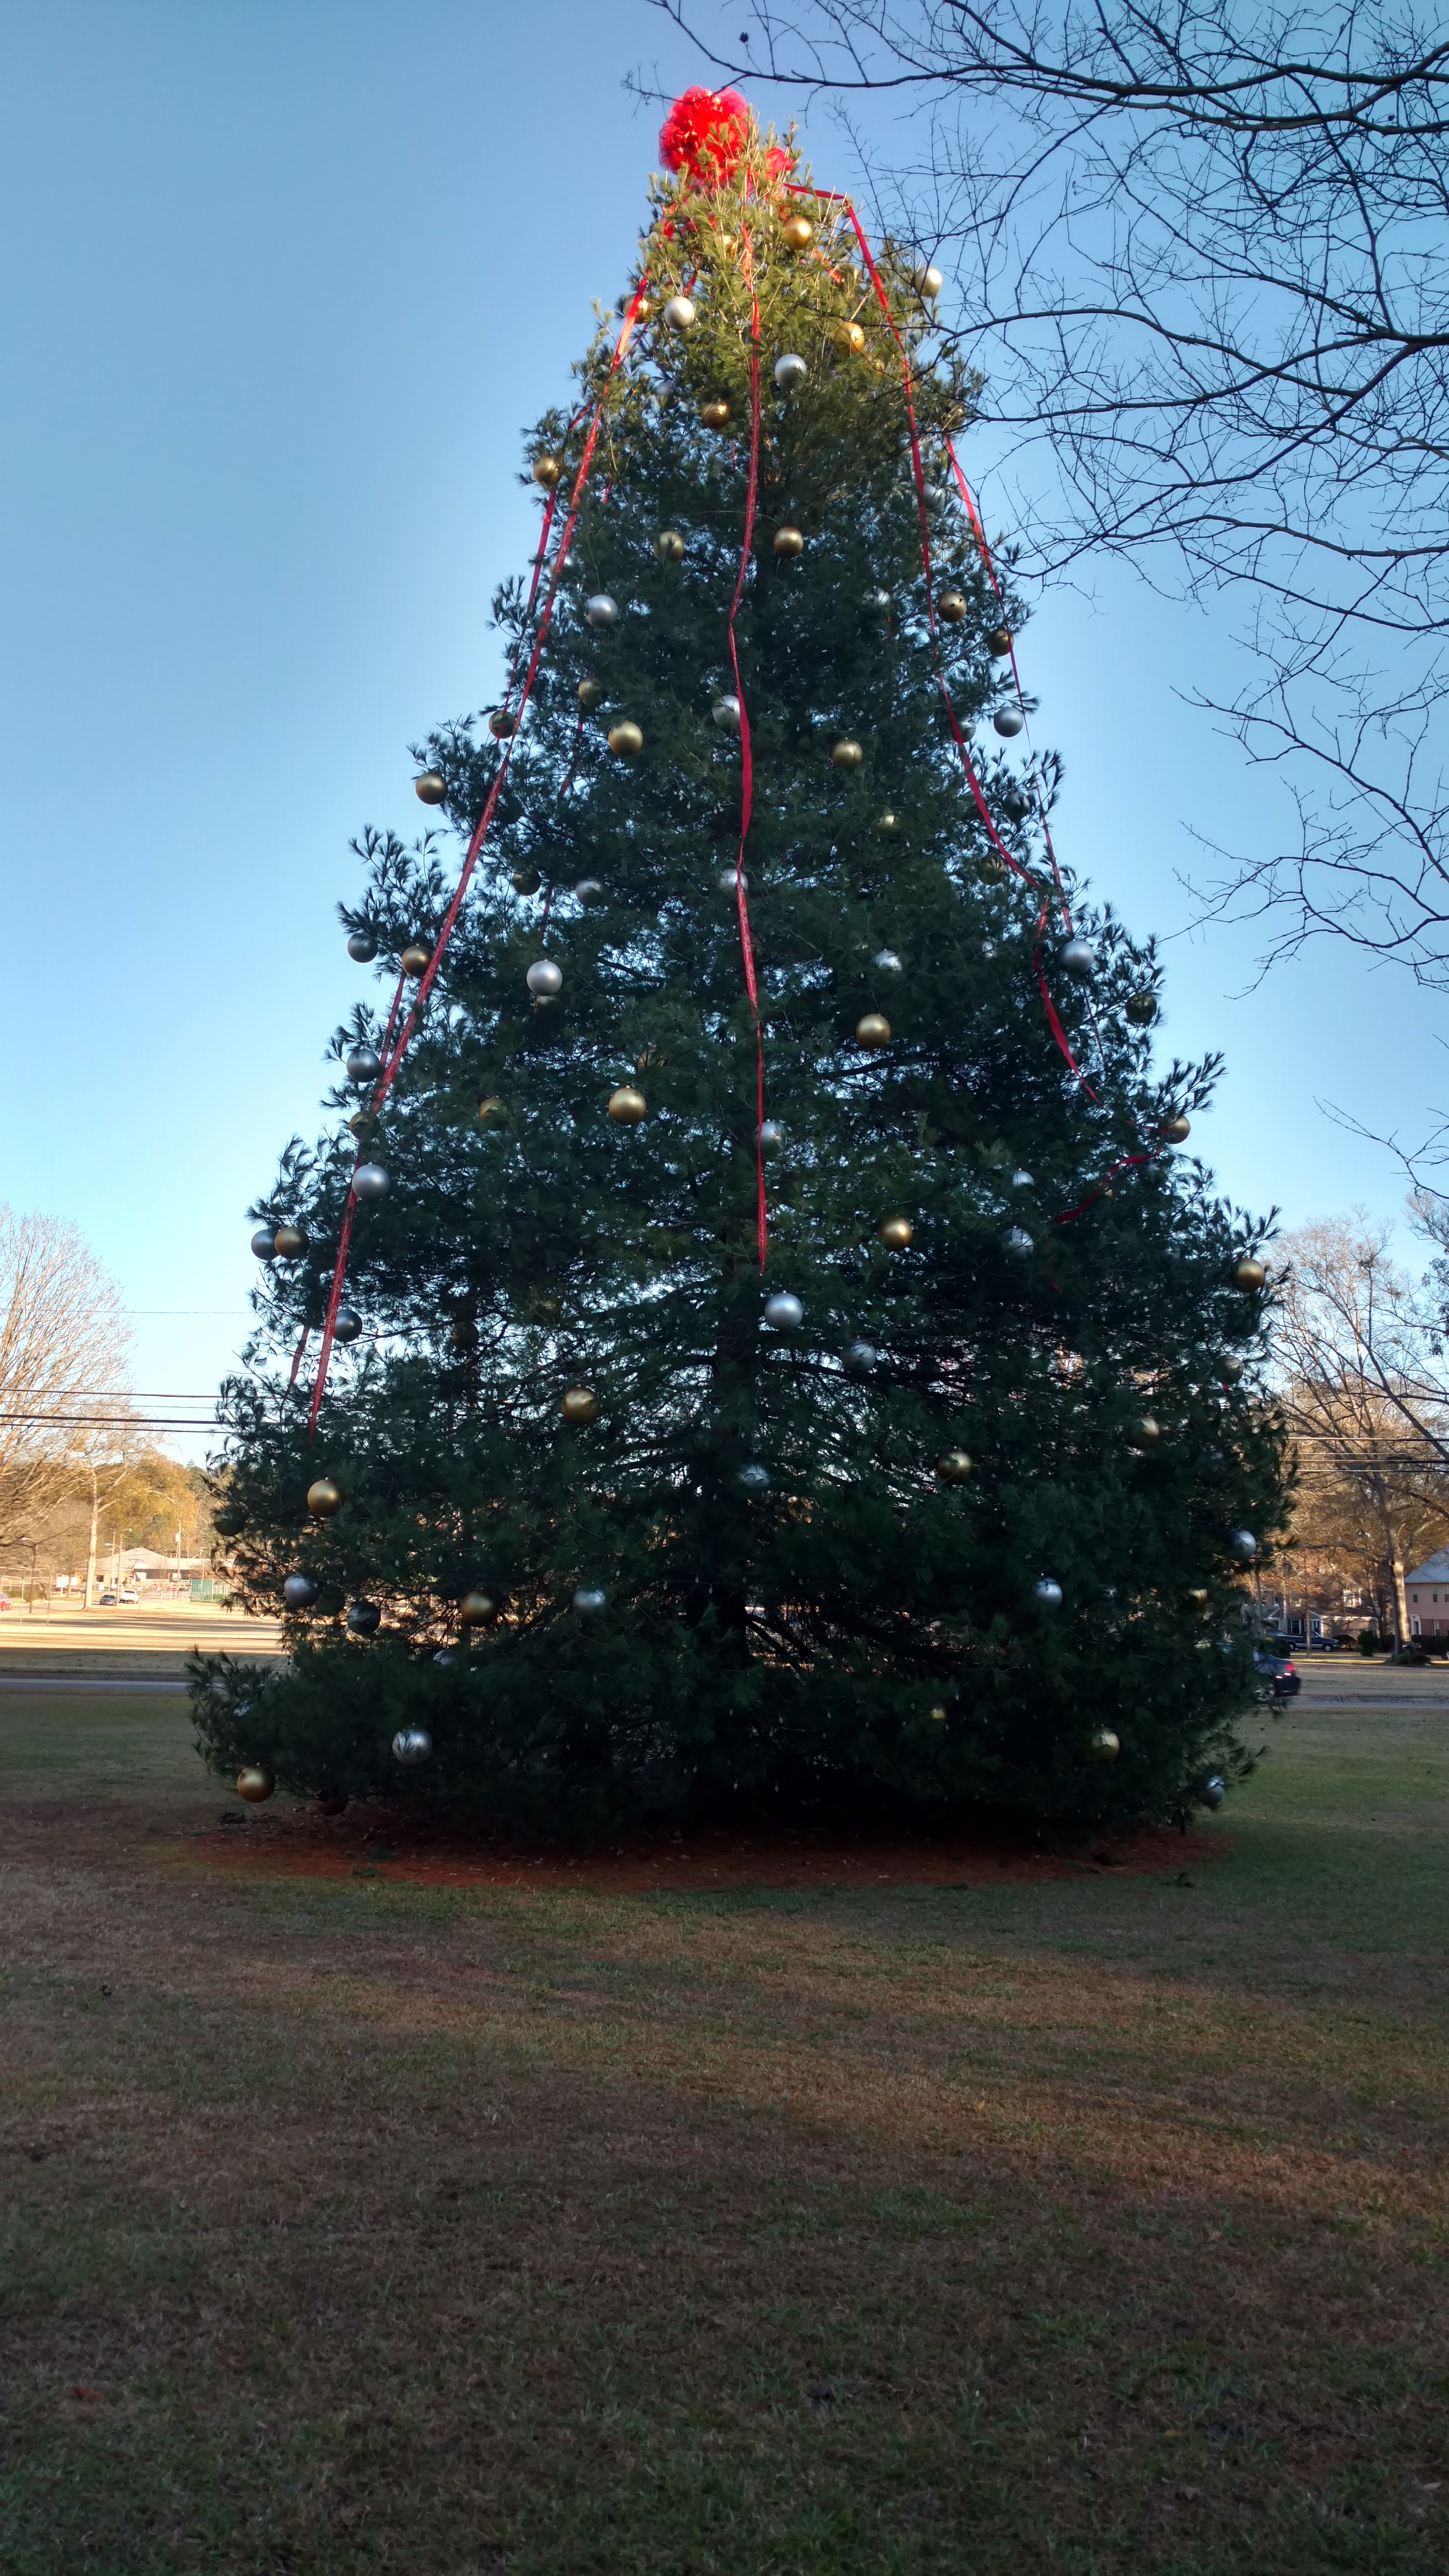 Trussville home, city Christmas tree vandalized